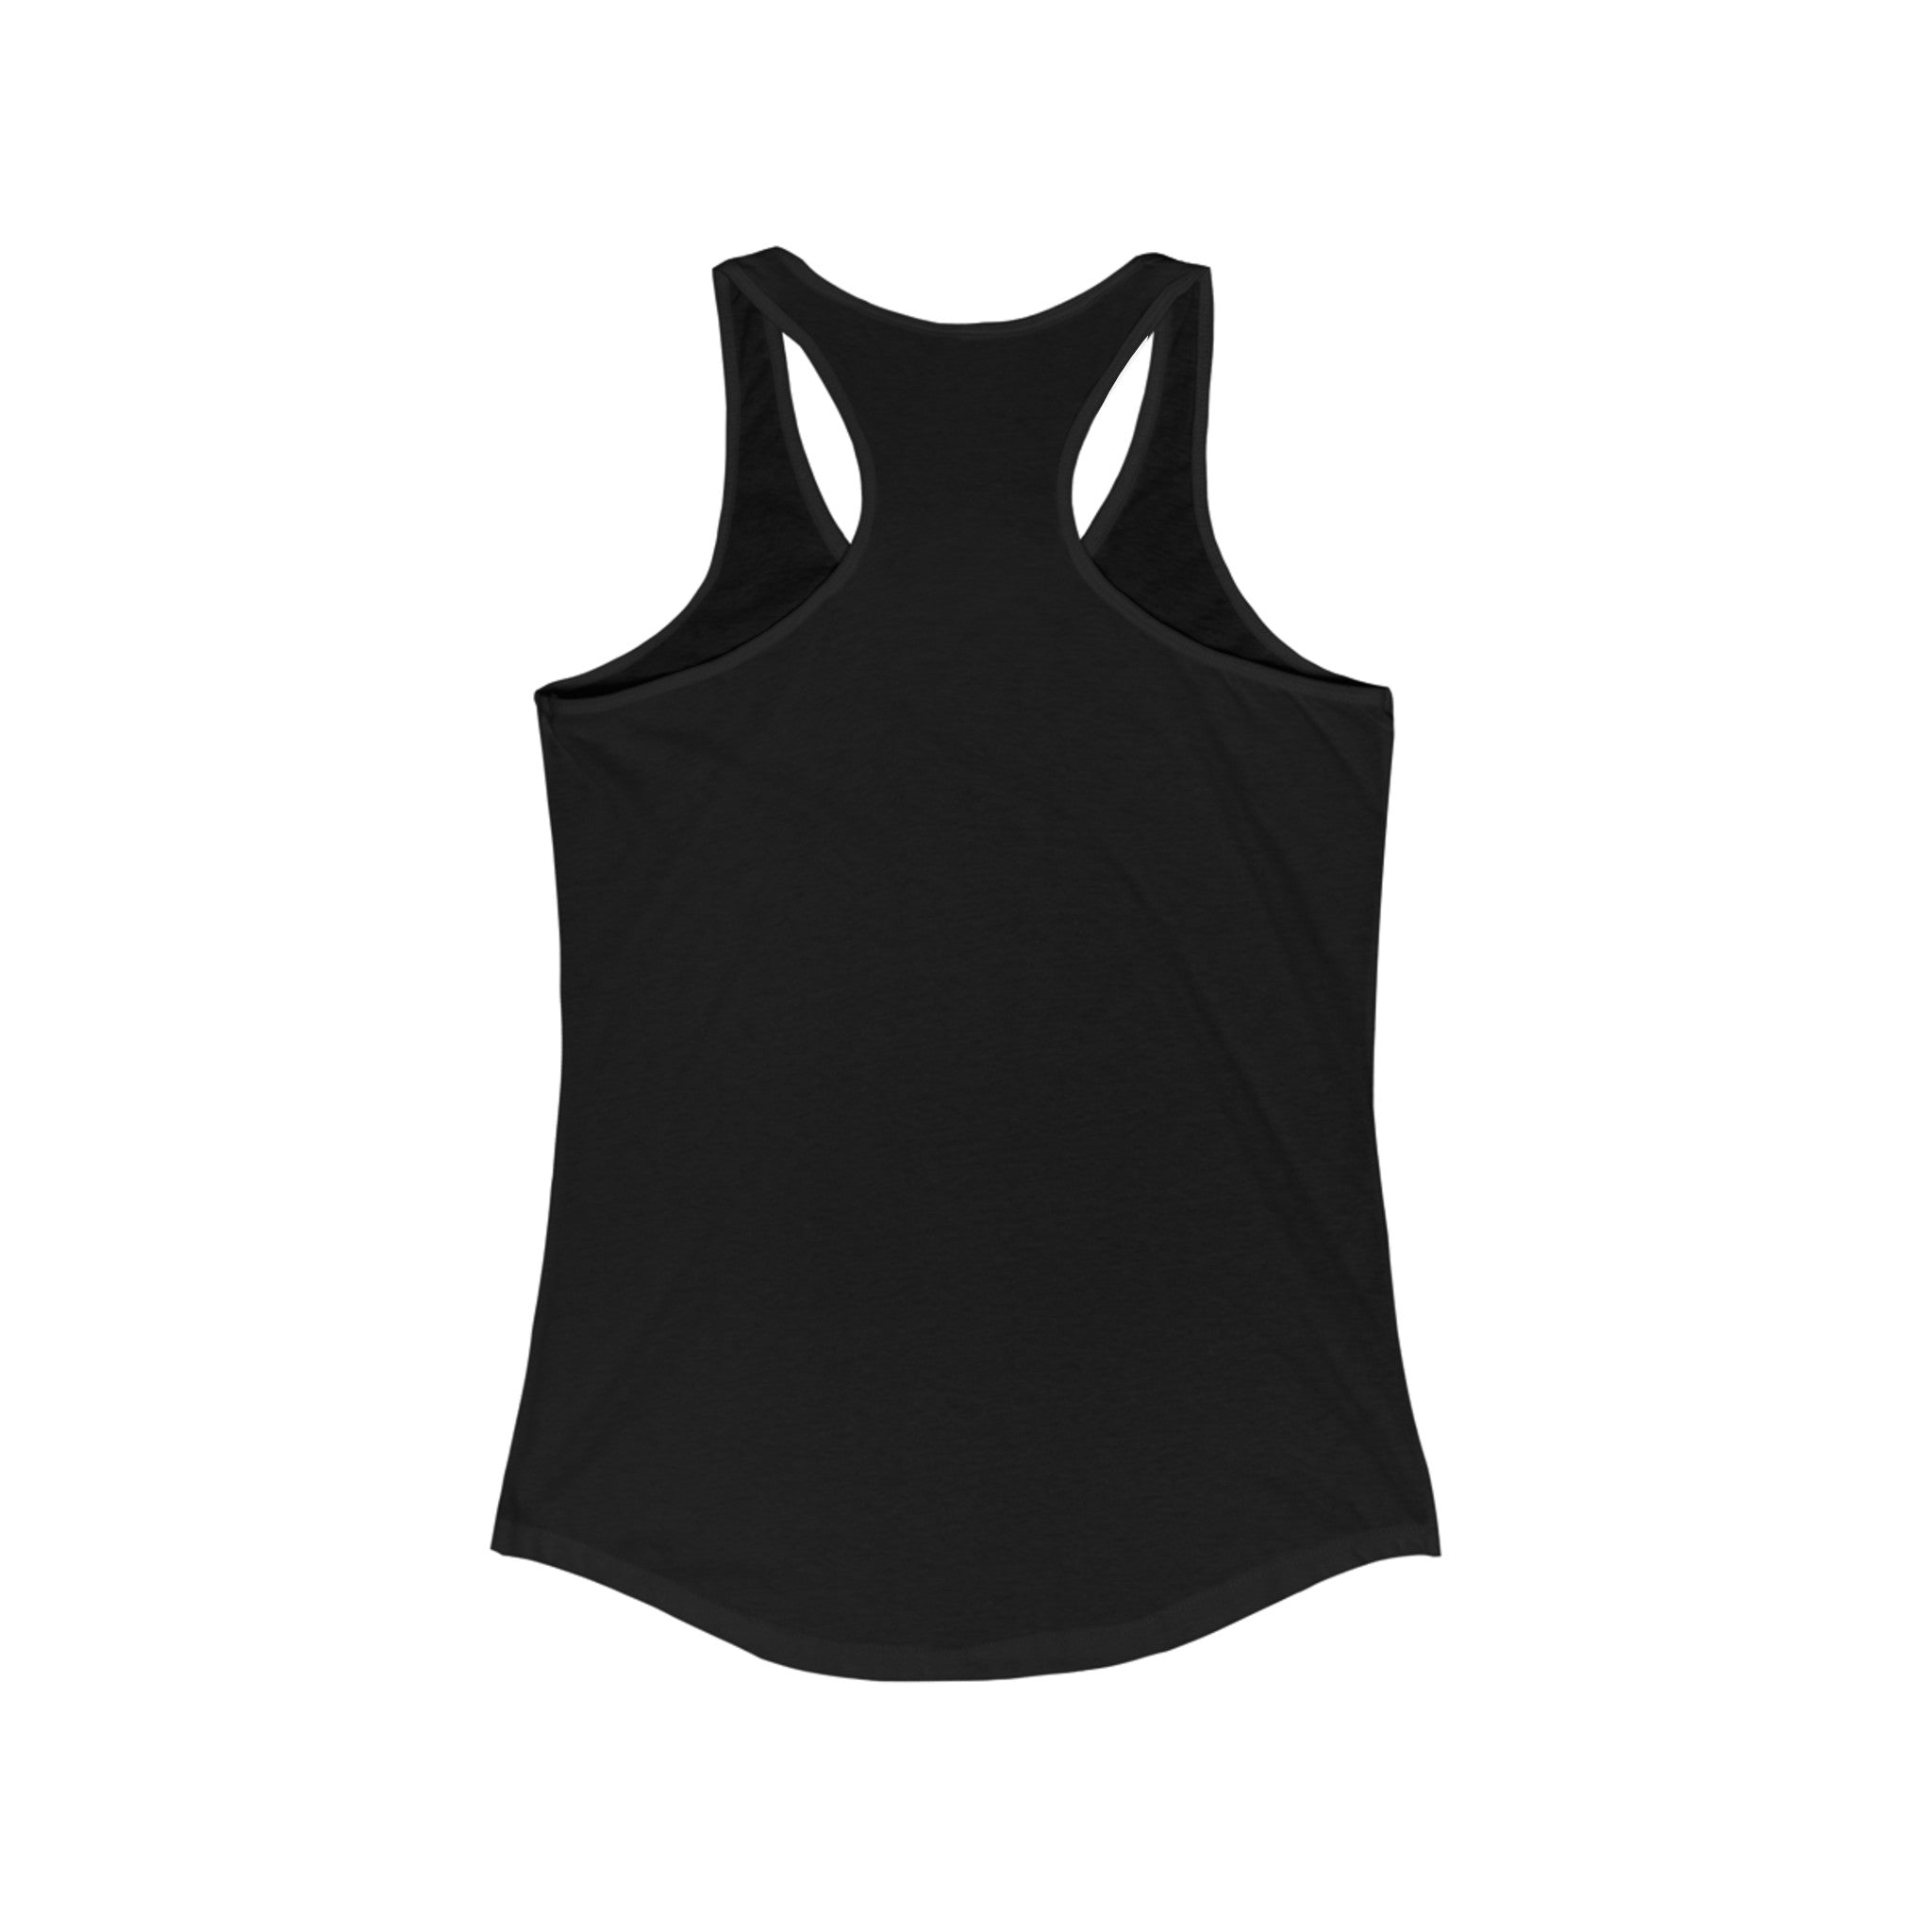 A black Wings of Victory - Women's Racerback Tank, perfect for active living, shown from the back.